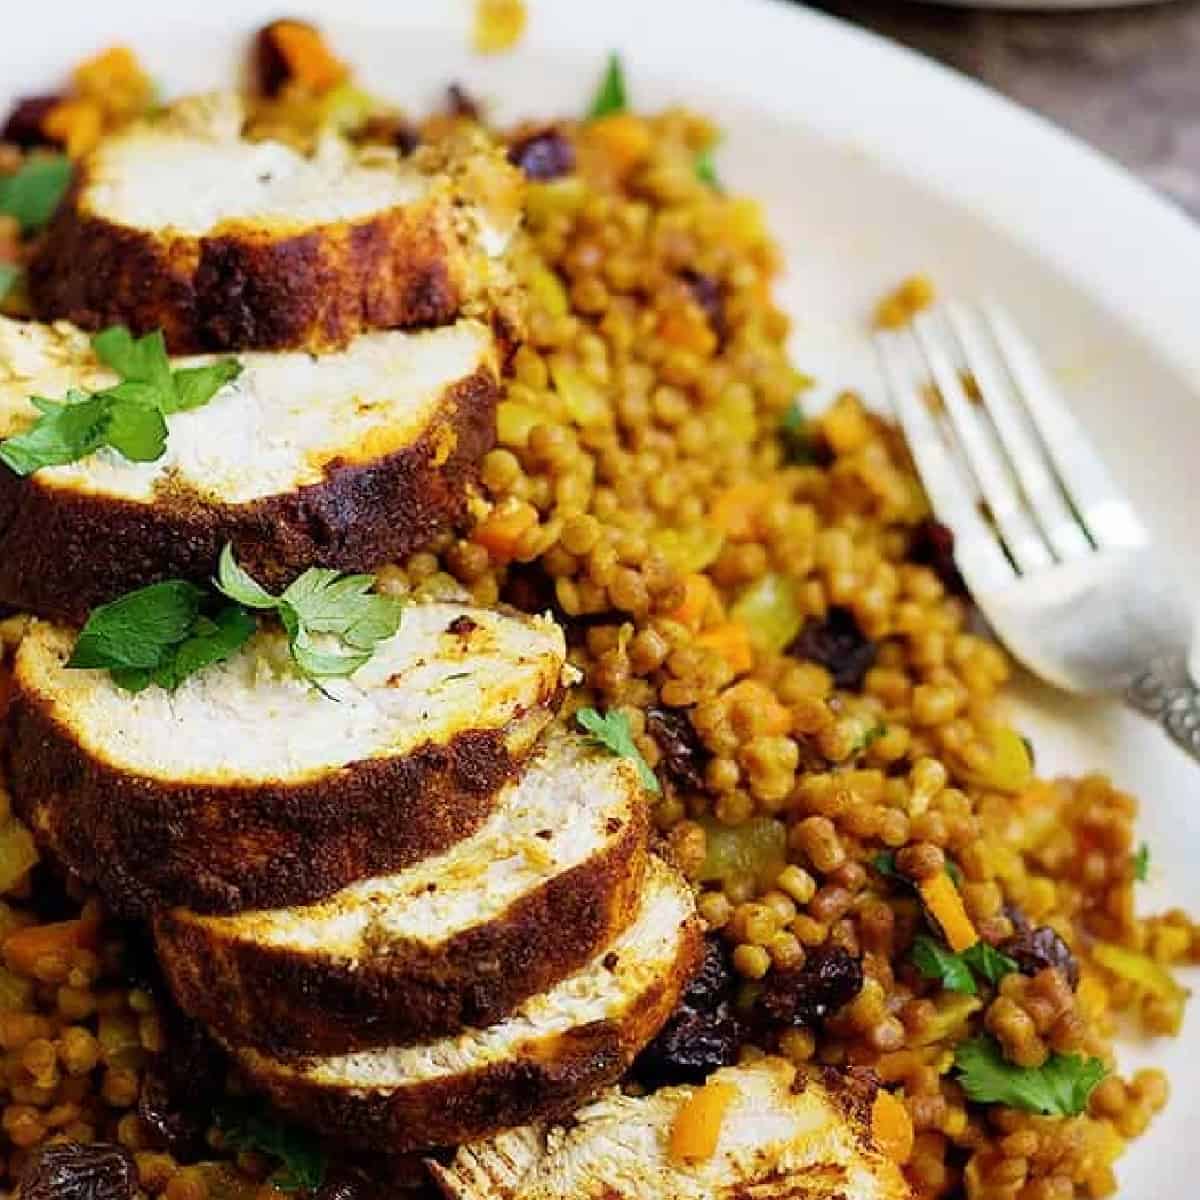 Enjoy a festival of flavors with this Moroccan chicken recipe. Chicken breast marinated in aromatic spices and cooked to perfection, served with delicious couscous makes this the perfect meal!
